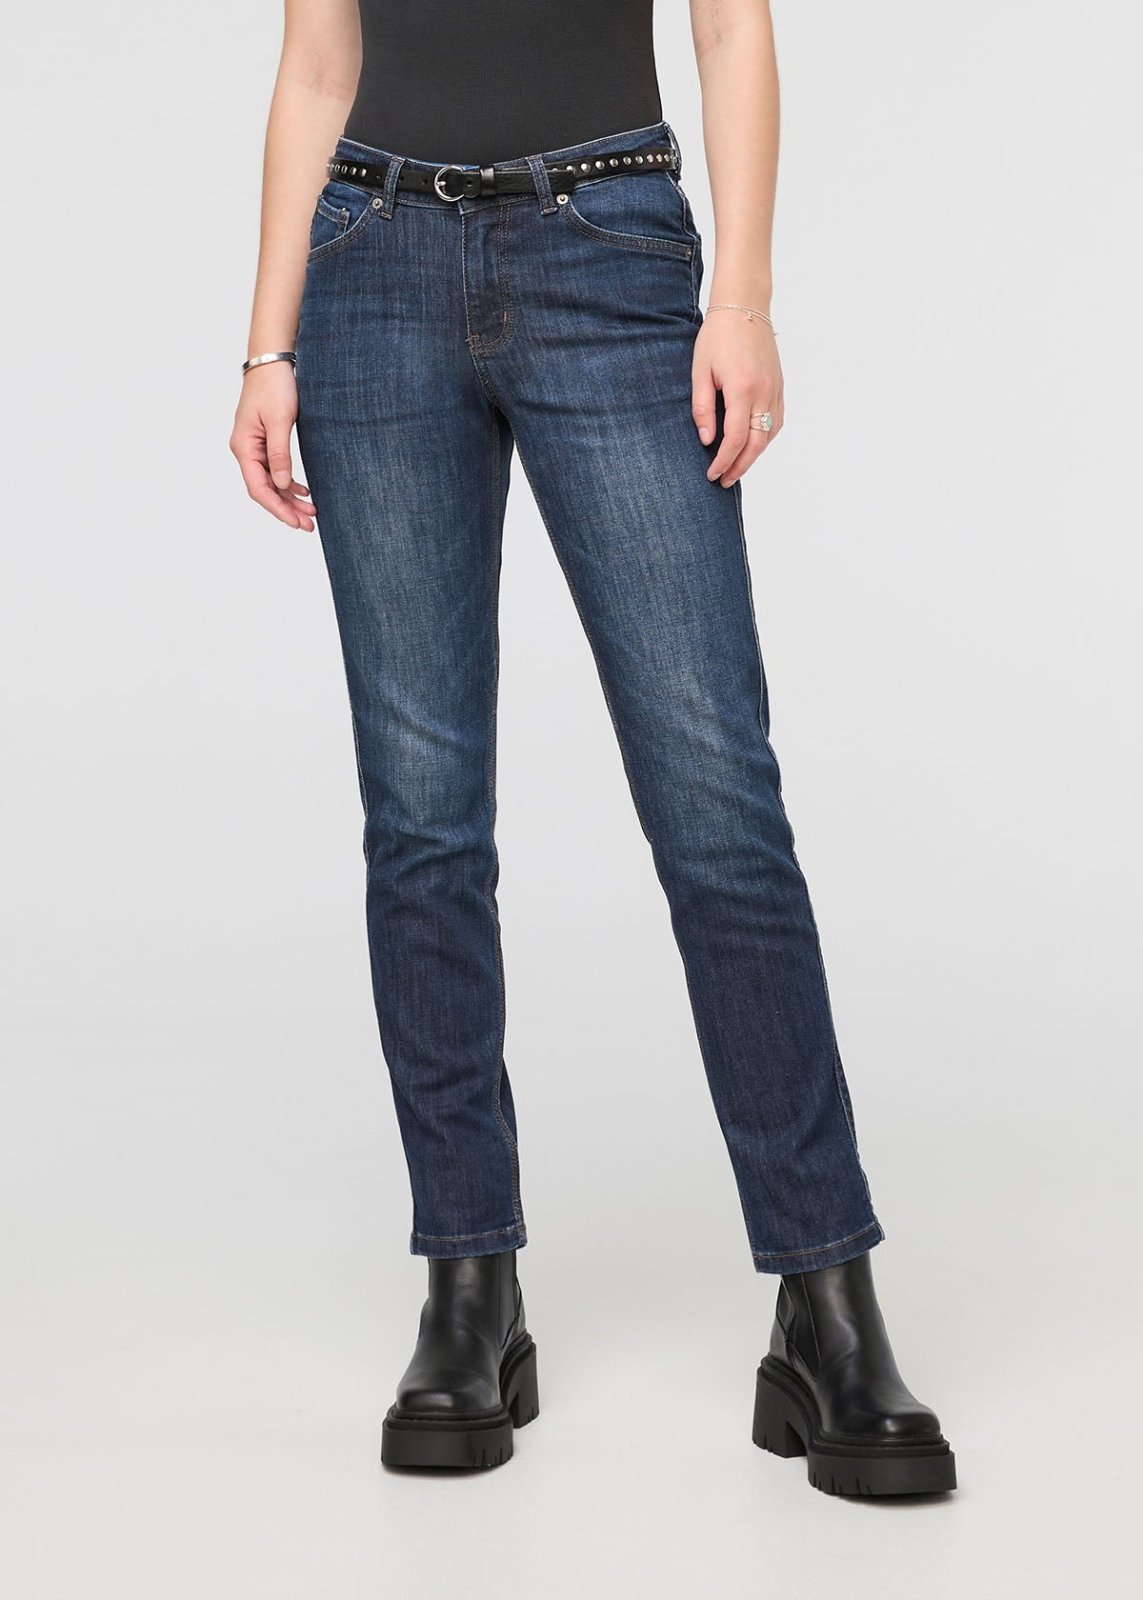 Utopia By Hue Women's Mid-Rise Stretch Slim Fit Pull On Denim